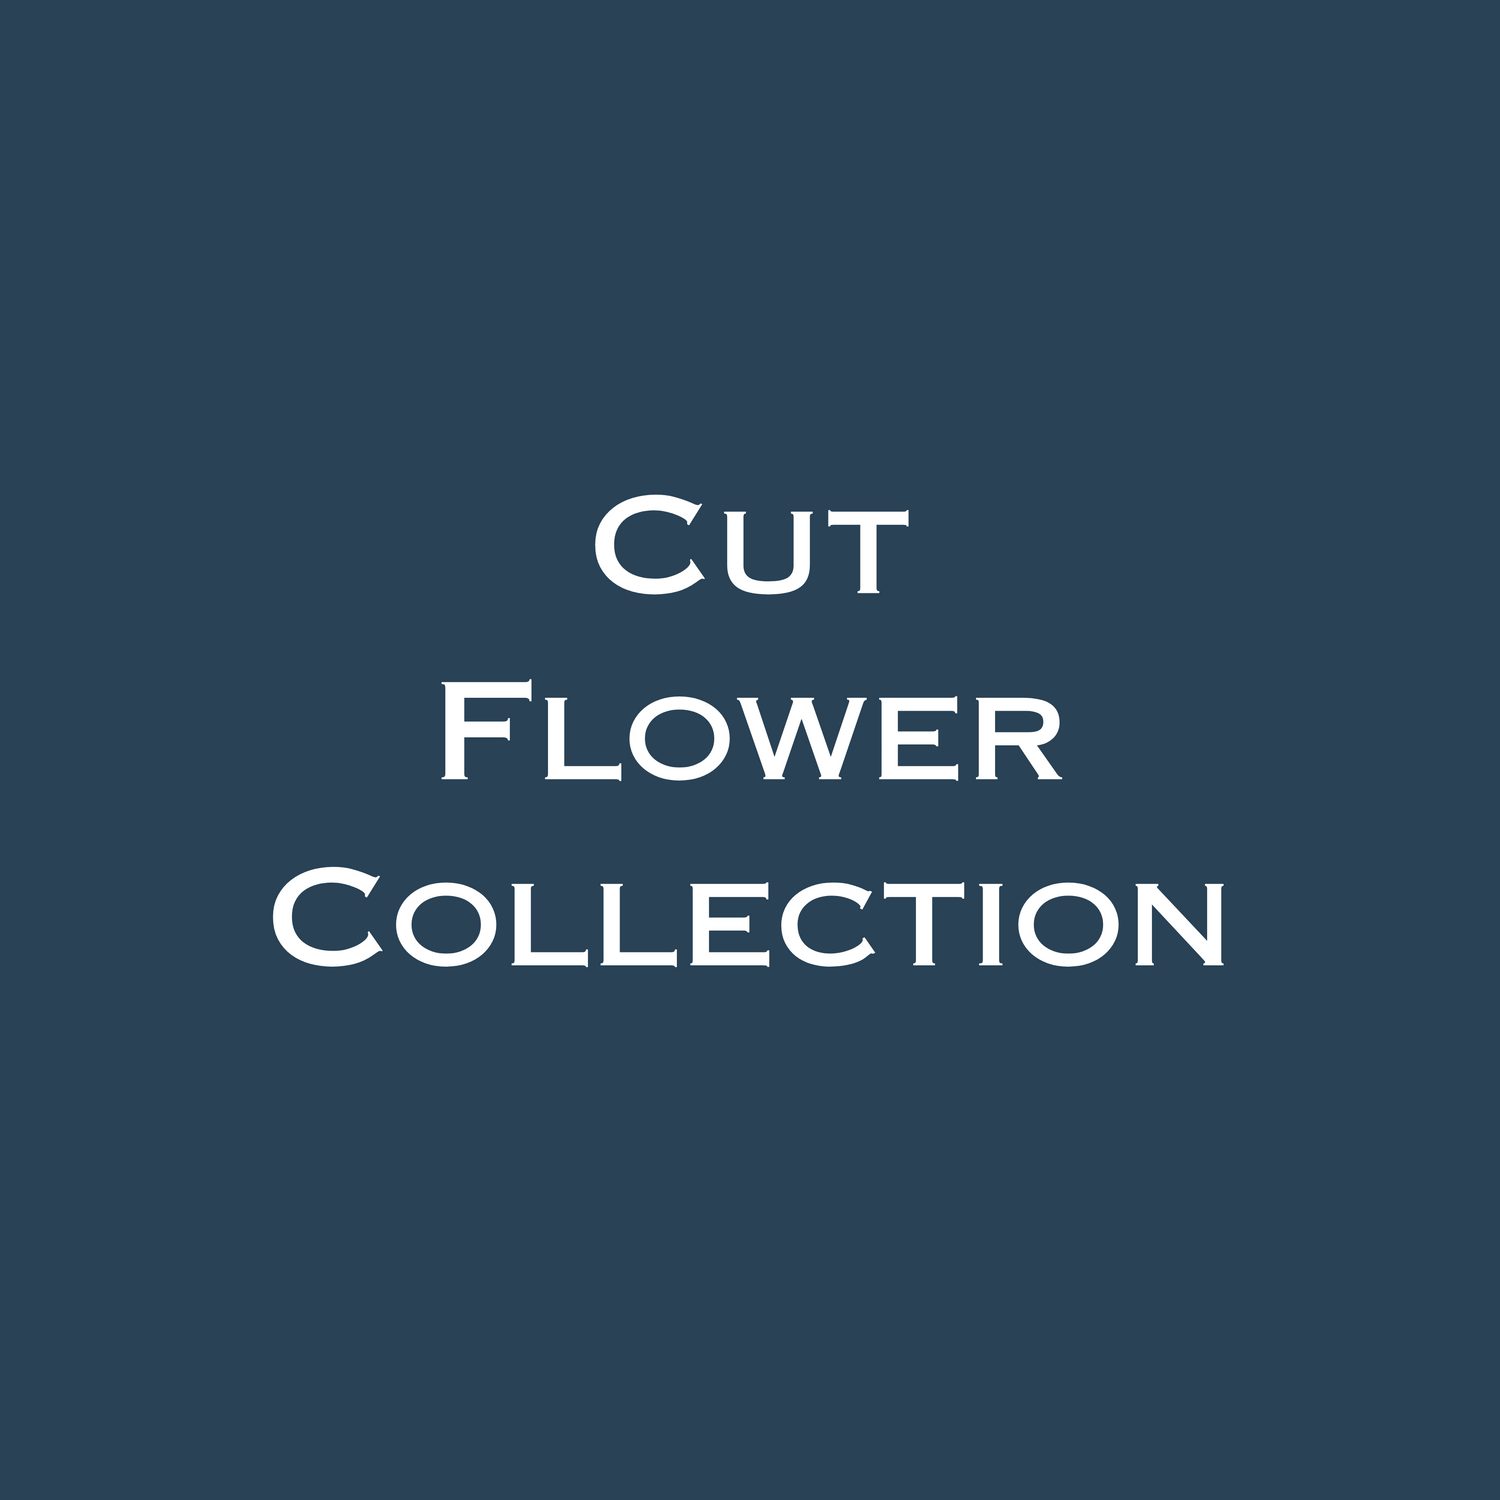 Cut Flower Collection